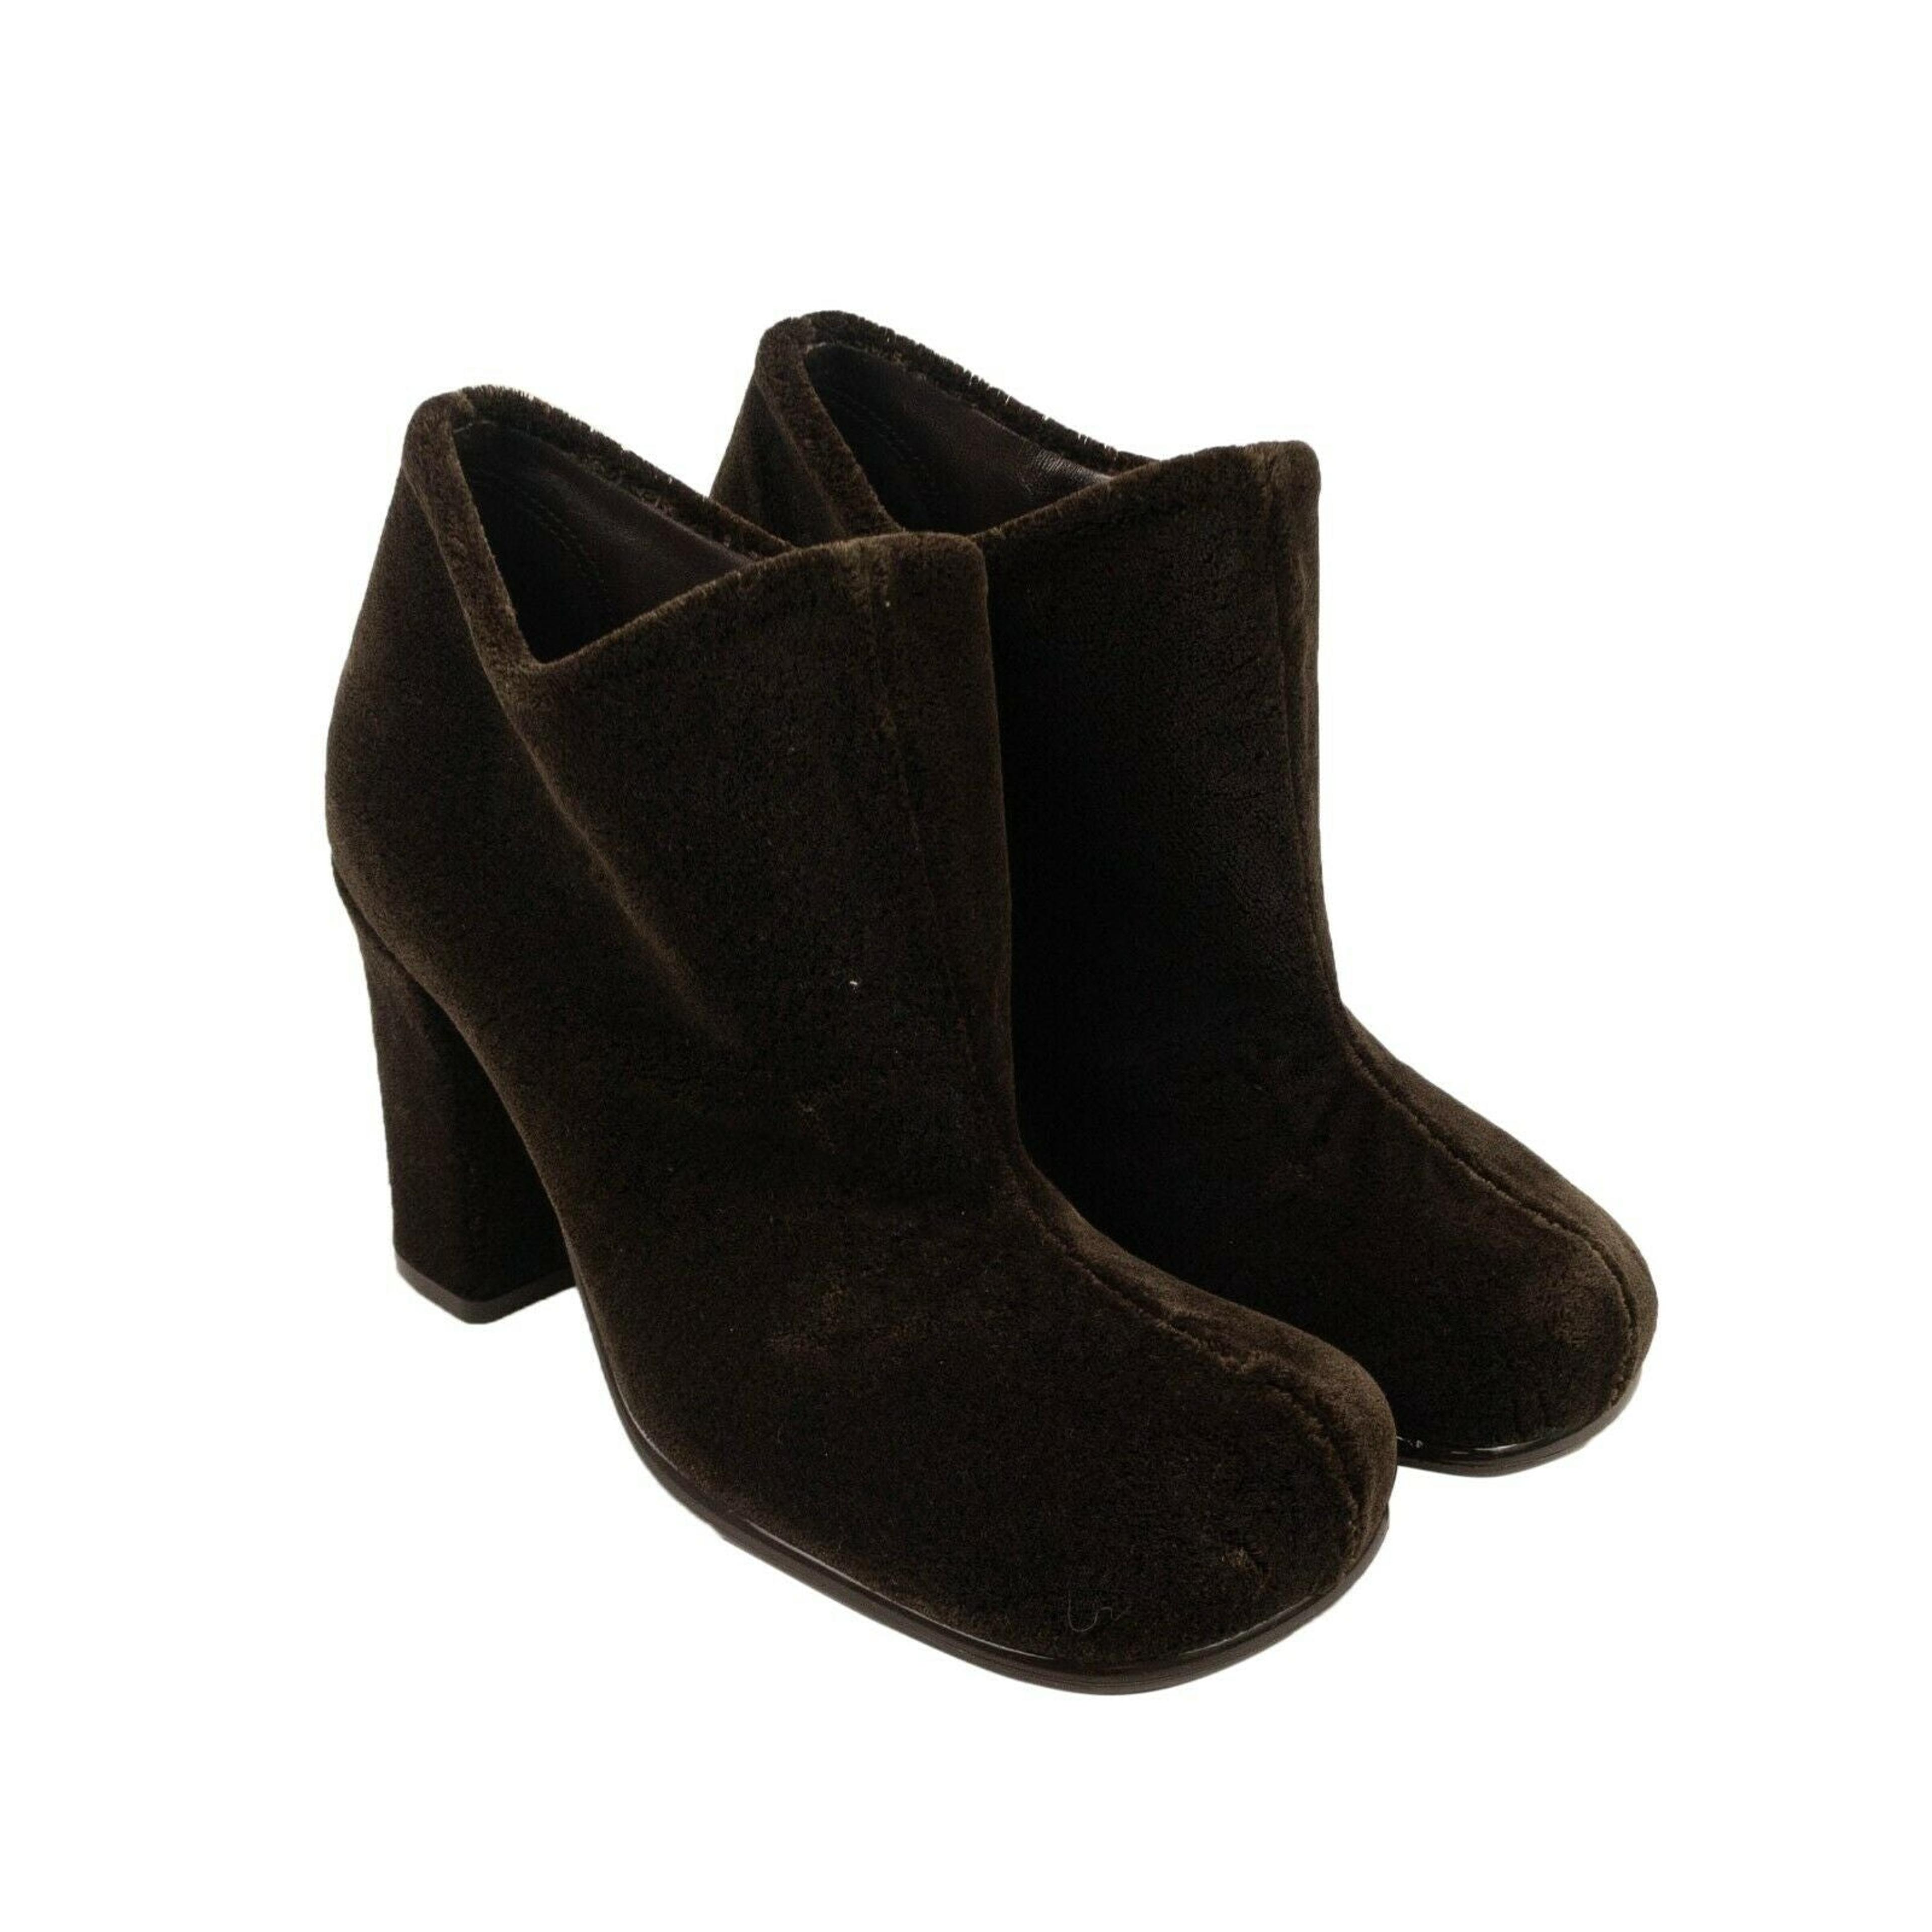 Alternate View 2 of Brown Suede Storm Square Toe Ankle Boots